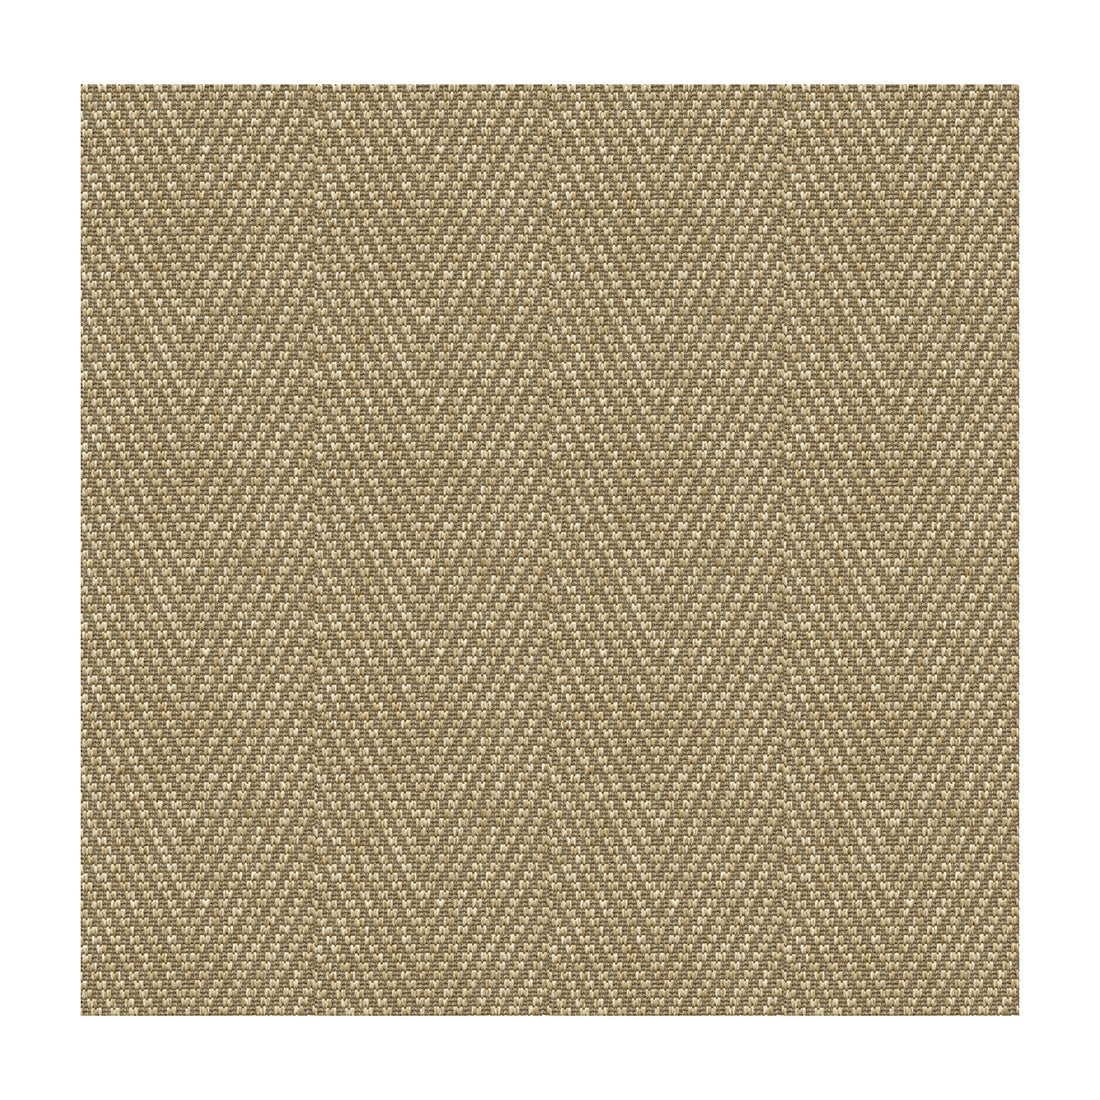 Bow Herringbone fabric in dune color - pattern 33495.106.0 - by Kravet Design in the Waterworks II collection